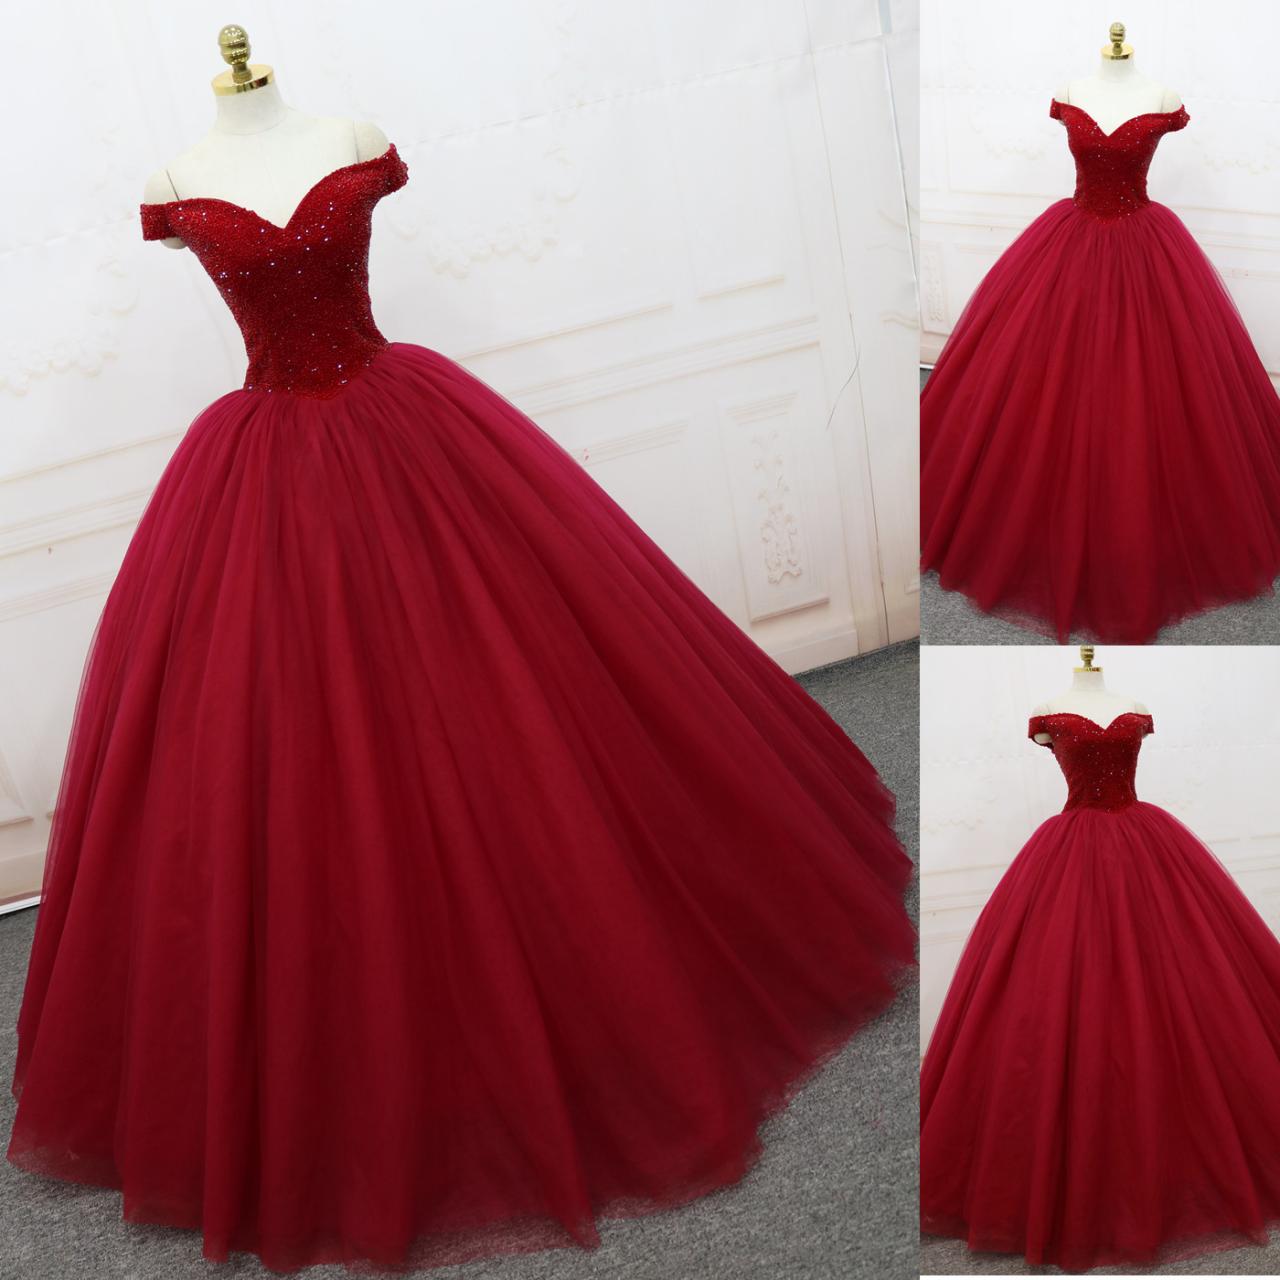 Sexy Strapless Red Cap Shoulder Lace Plus Size Long Wedding Dress Party Dress Prom Dress Evening Dress